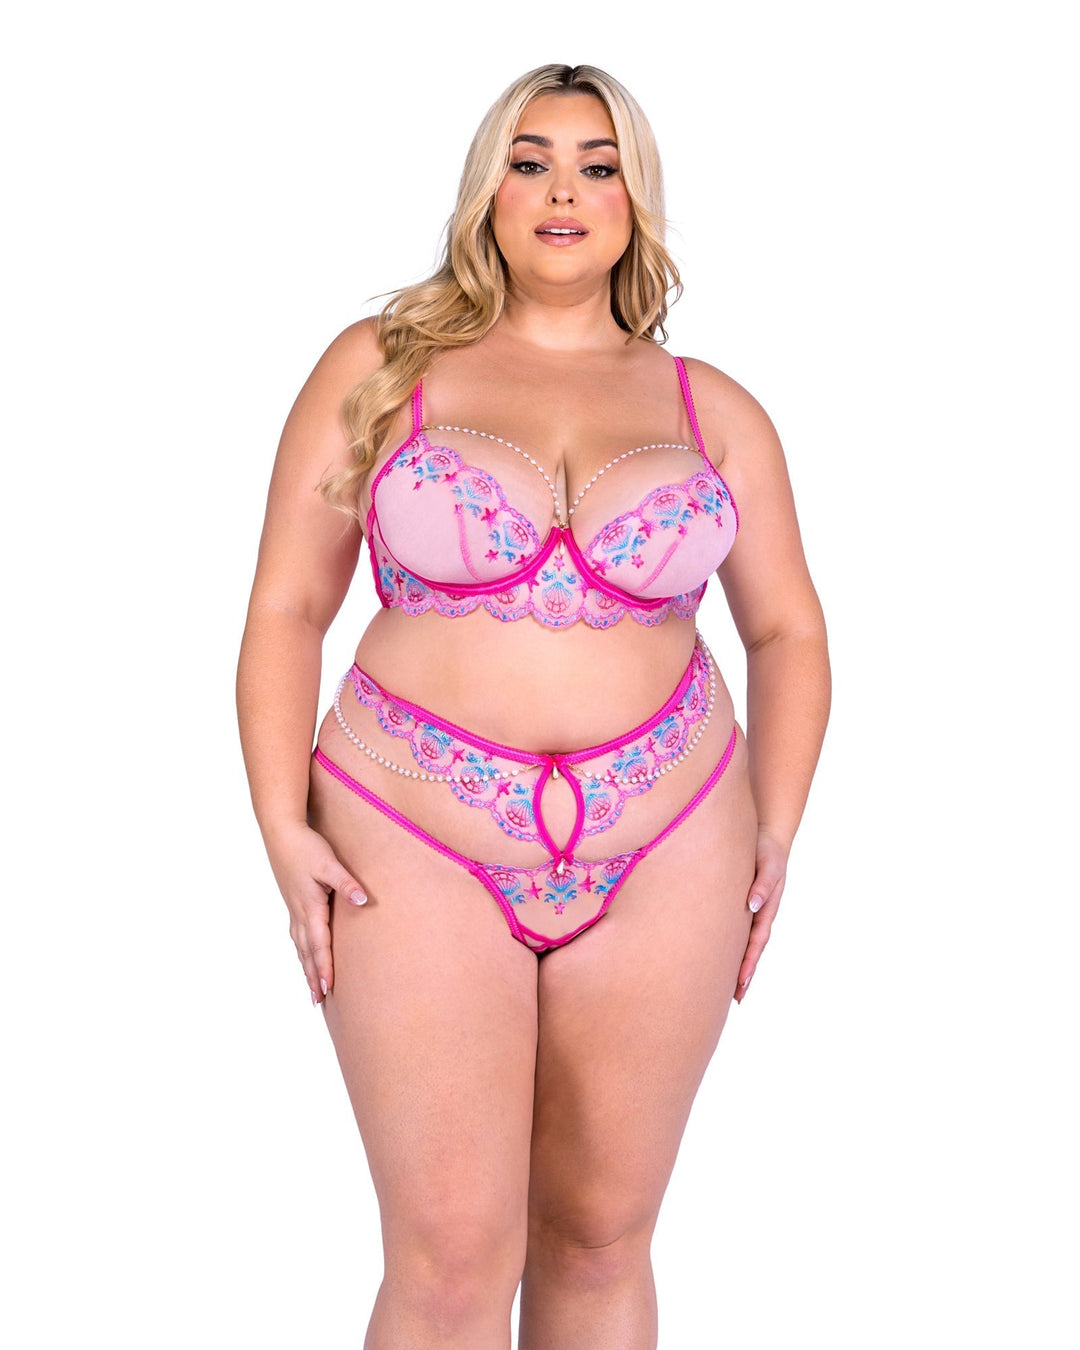 Queen Sultry Siren Rivage Satin Lace Pearl Bra Set Pink-Roma Confidential-Rebel Romance